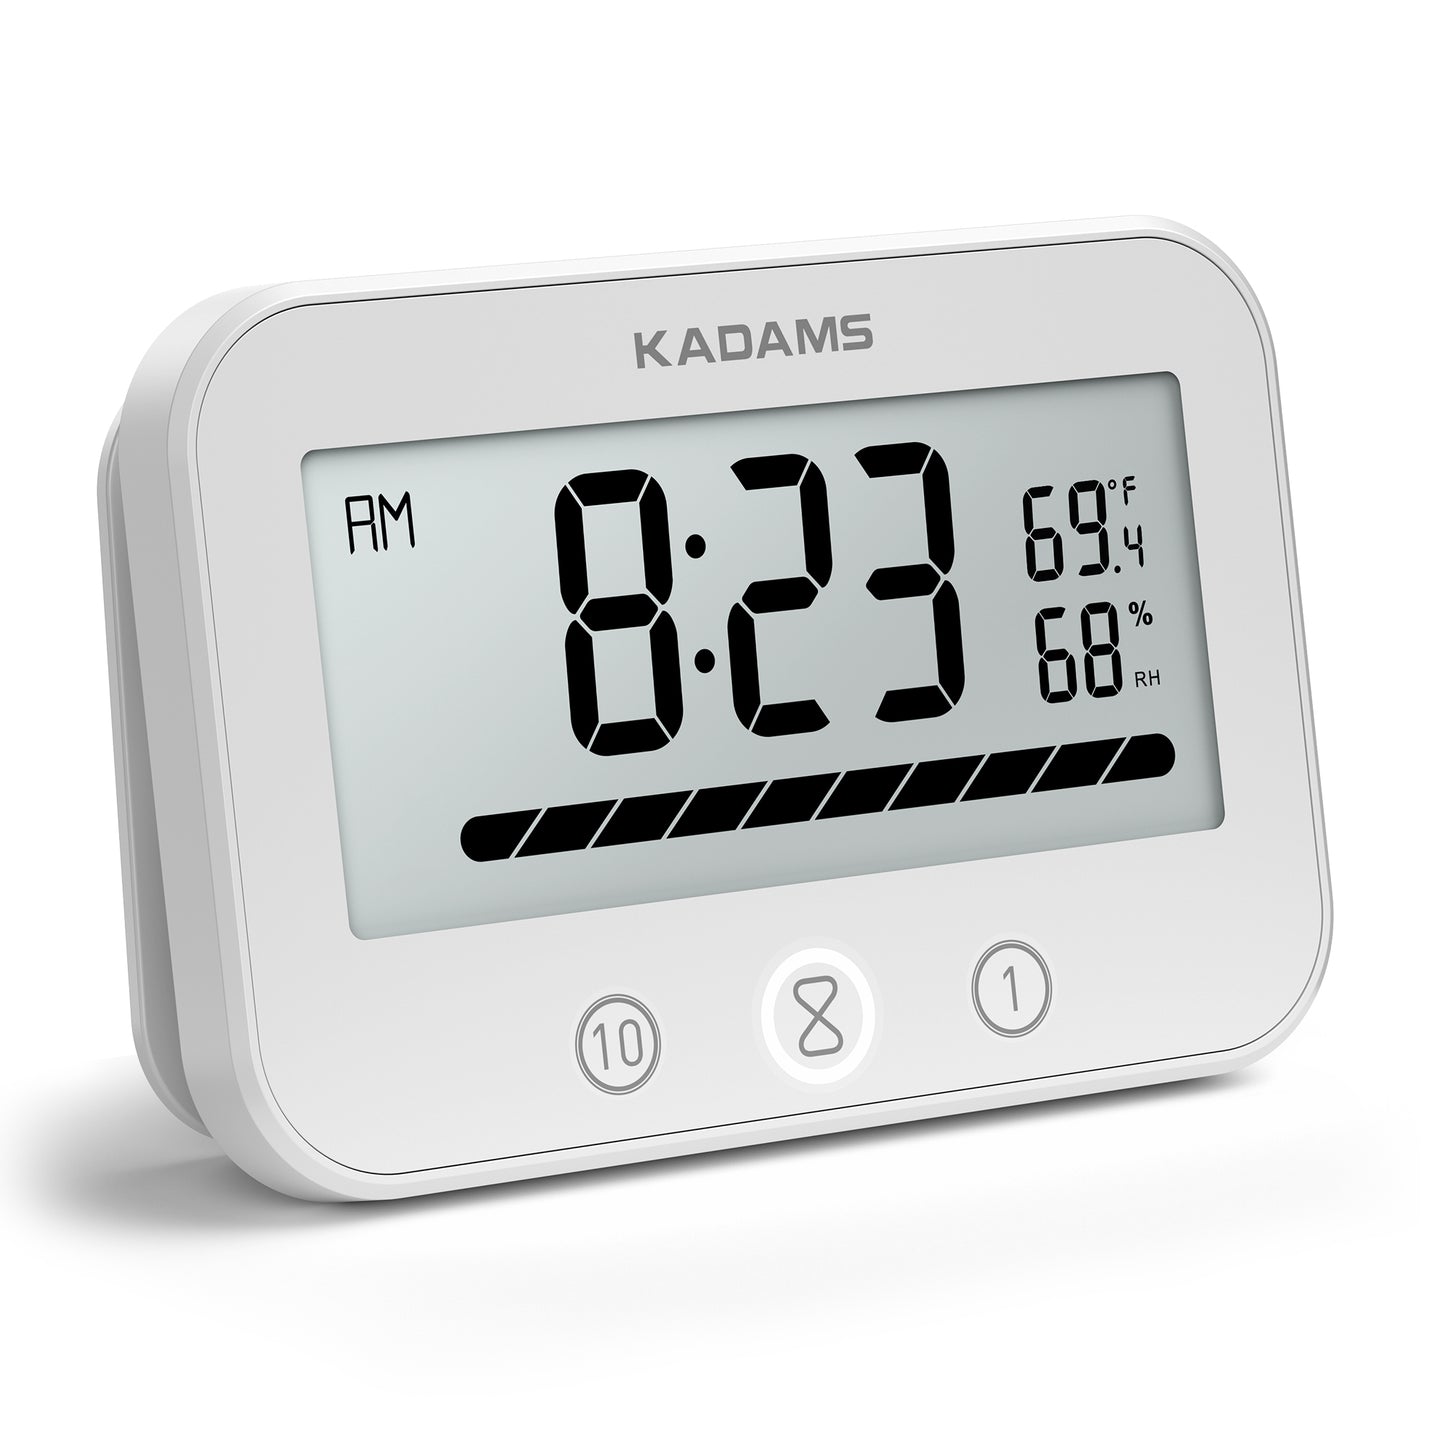 KADAMS Timer Digital Kitchen Timer Clock for Cooking Classroom Kids Bathroom Shower Countdown Count Up Productivity Timer, Waterproof with LCD Display Progress Bar Hanging Suction Cup